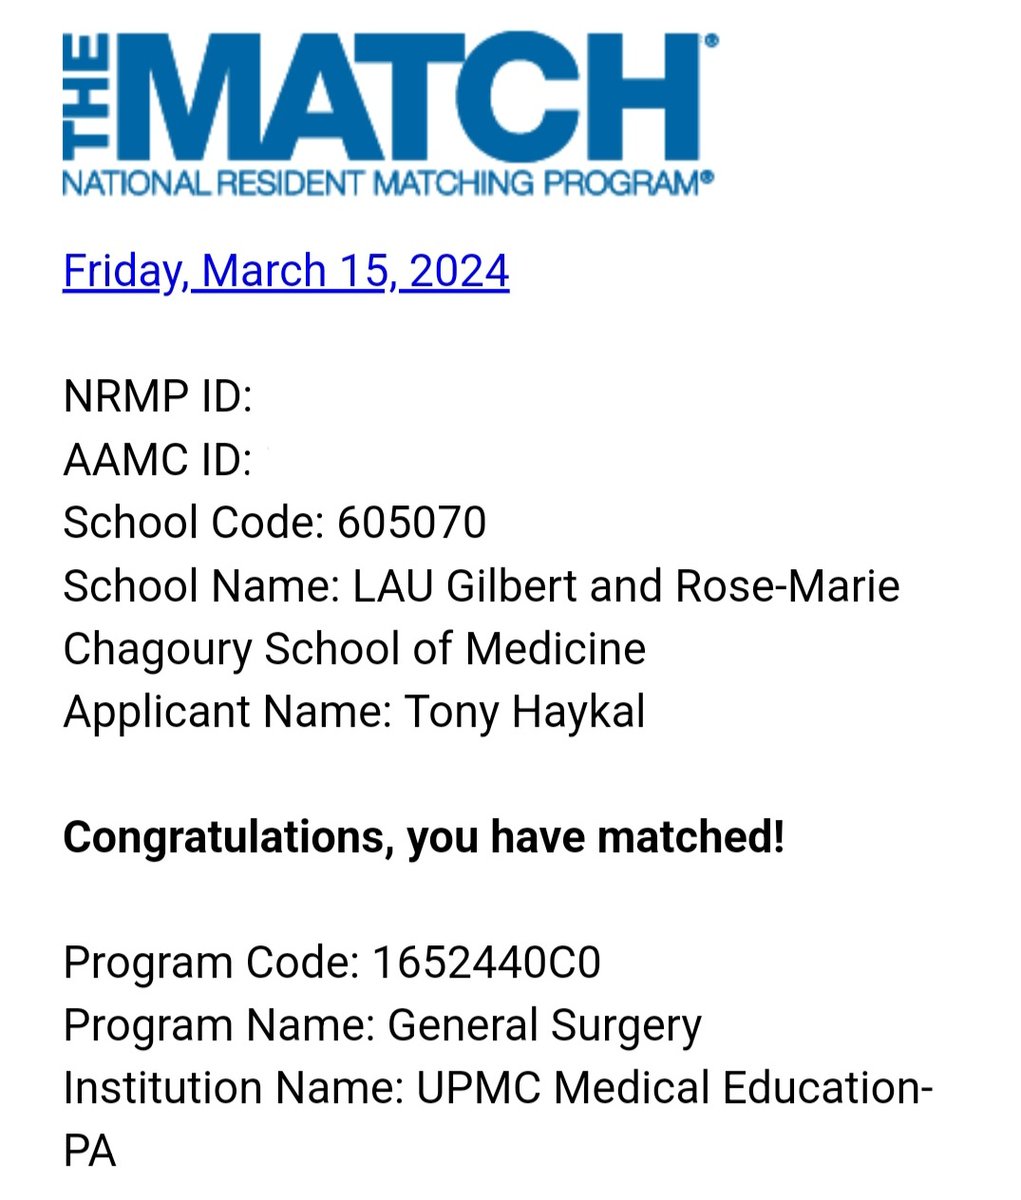 Turns out I won't be moving far in a couple of months... Beyond excited to join my dream General Surgery residency program at UPMC @PittSurgery! So proud yet humbled by the opportunity to make a huge impact on patients' lives!
#Match2024 #GenSurgMatch #IMG #SurgeonScientist